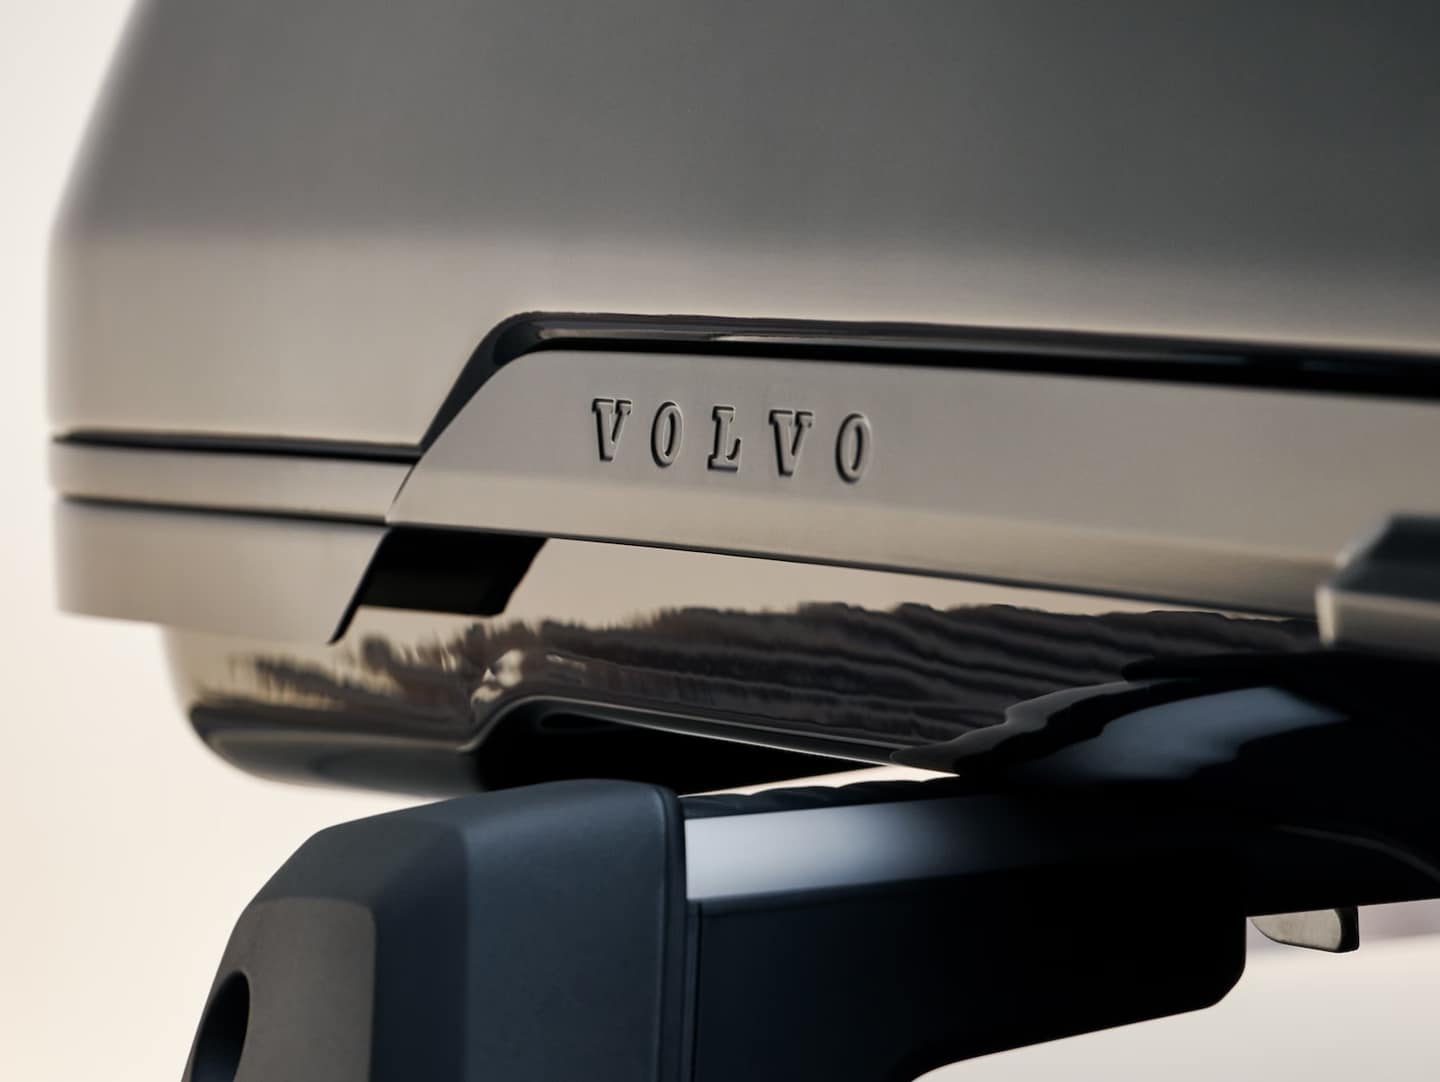 Optimize loading with the new, more sustainable Volvo Cars roof box.